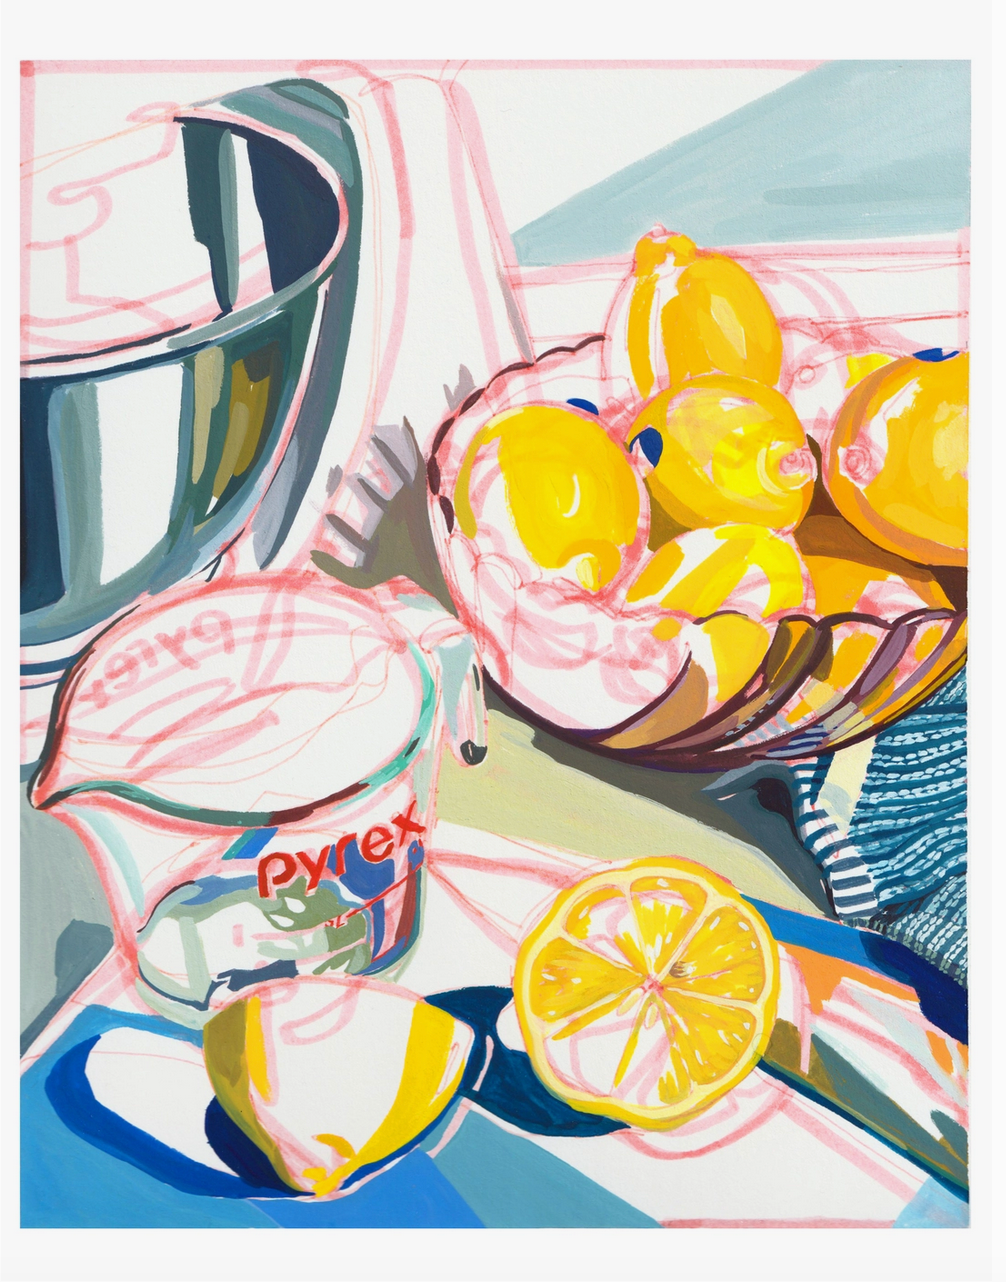 "Lemons" Lemonade in A Pyrex Signed Archival Giclee Print by Anissa Riviere - Little Birdies Boutique